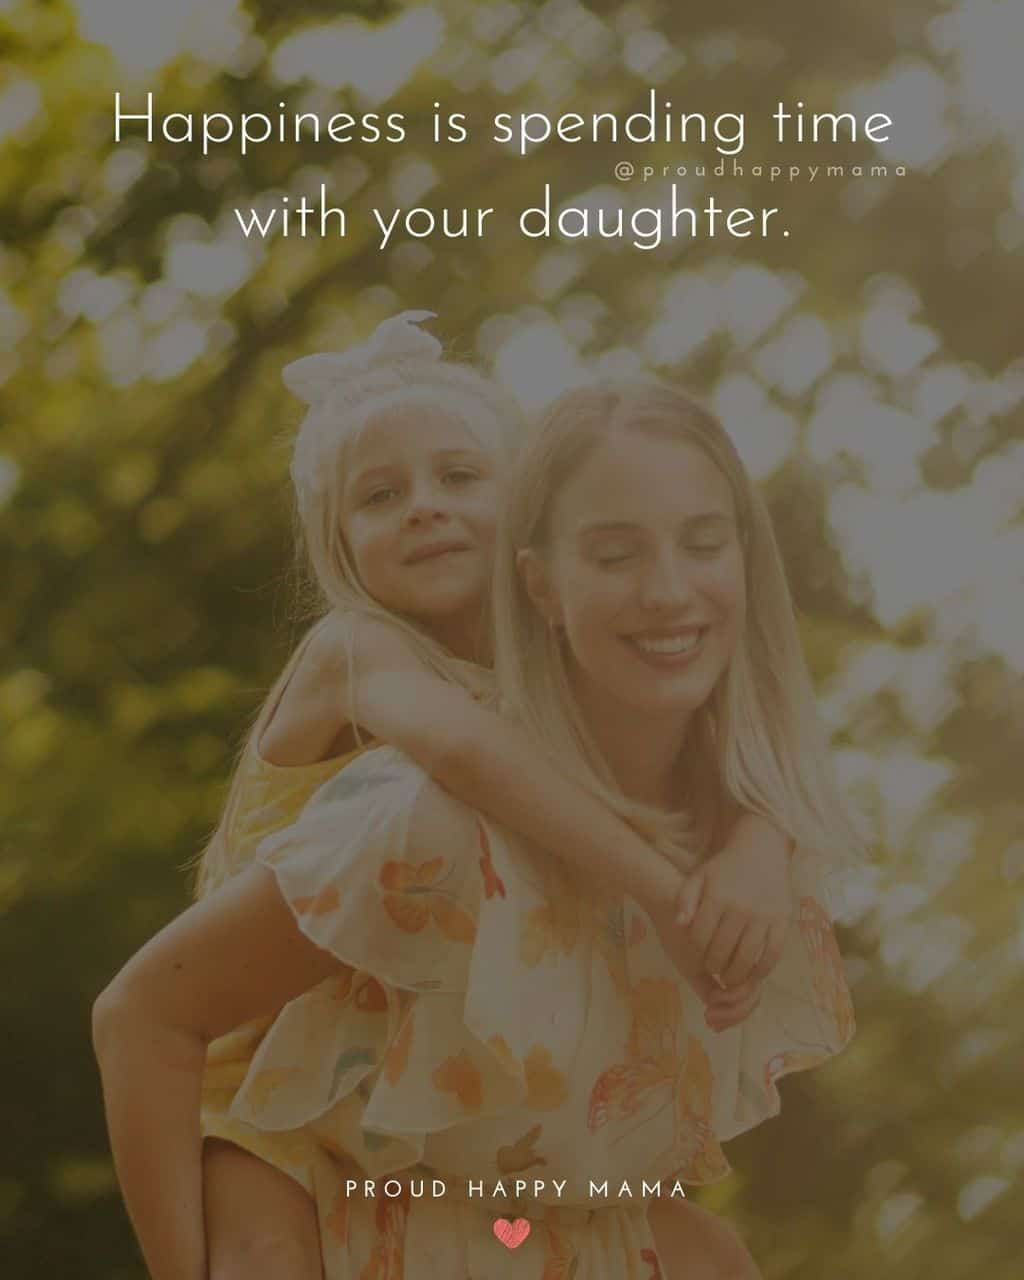 happiness is my daughter quotes - ‘Happiness-is-spending-time-with-your-daughter.